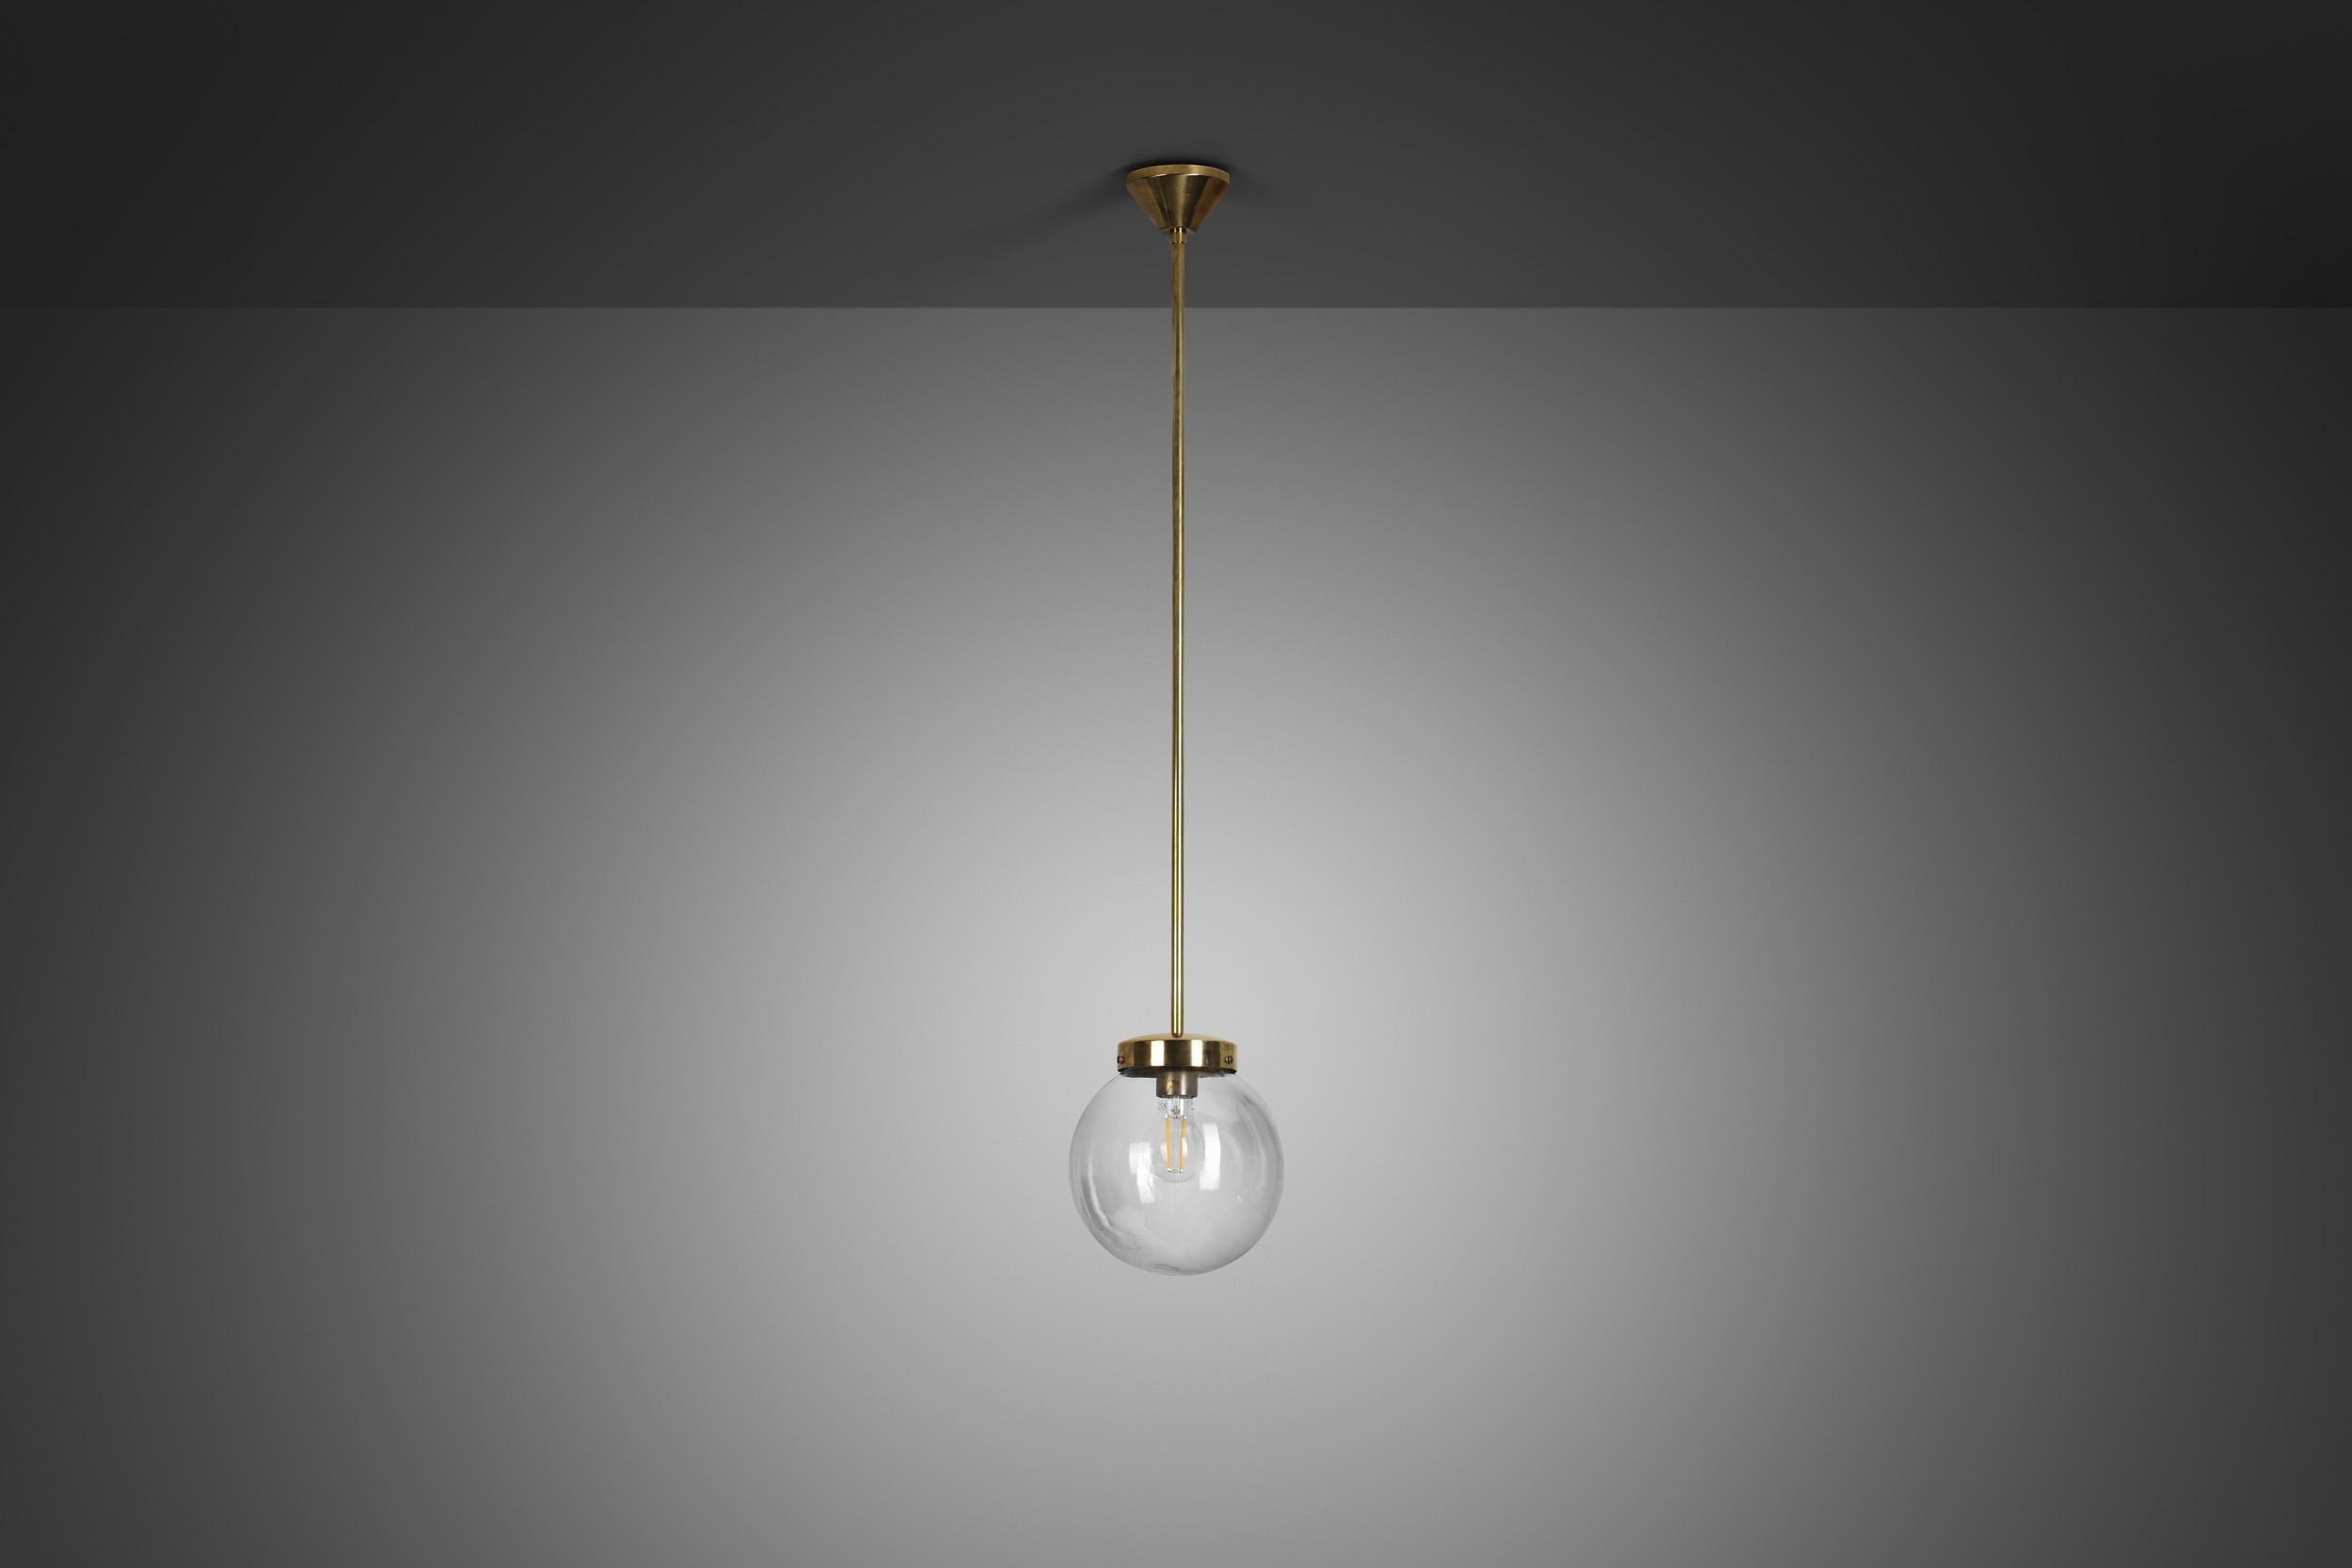 Mid-20th Century Mid-Century Modern Brass and Glass Ceiling Lamp, Europe ca 1950s For Sale